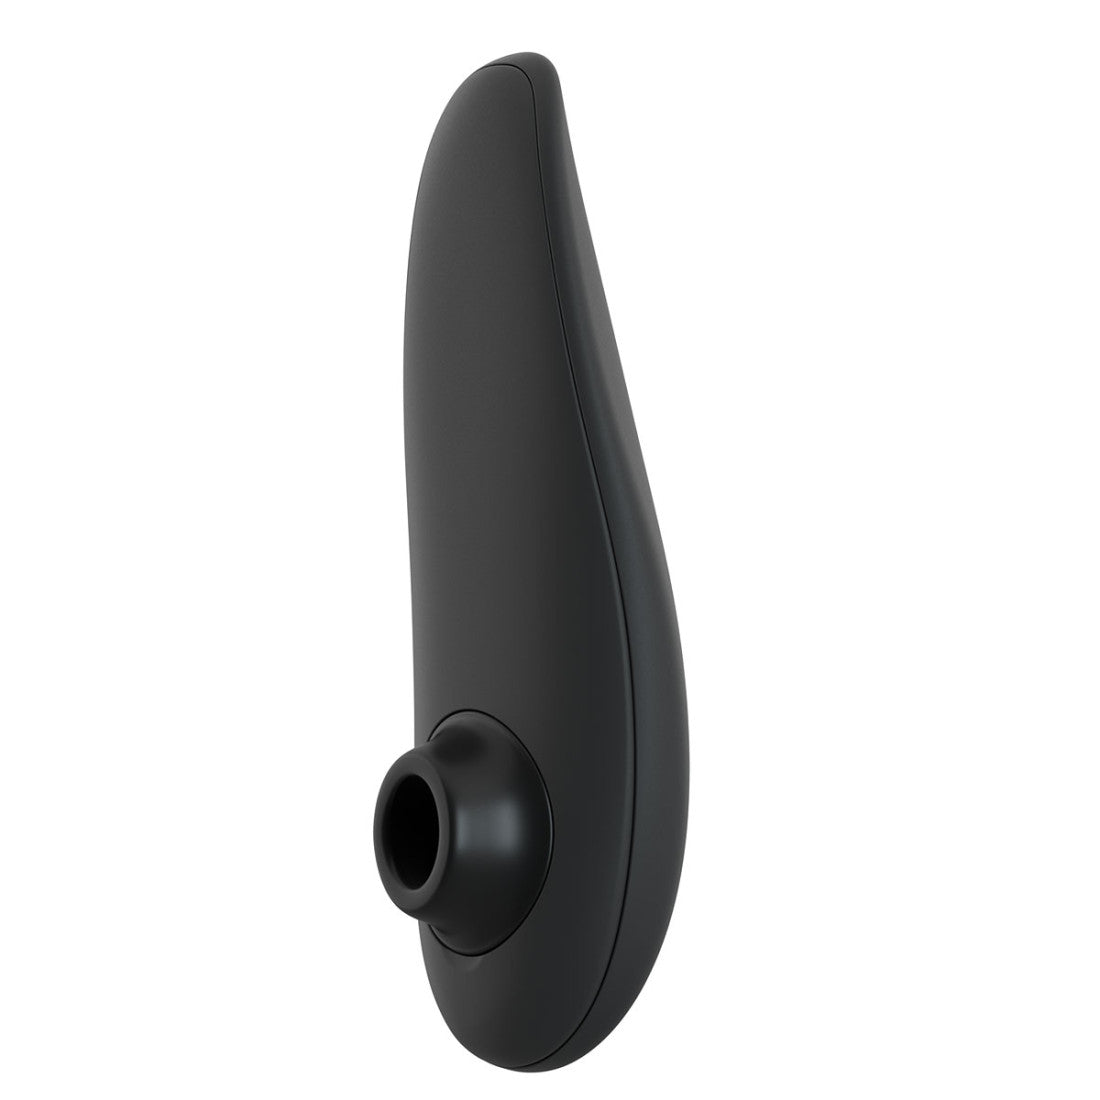 Womanizer Classic clitoral suction toy in black. A teardrop shaped toy with a silicone cap with an oval hole, which sticks out of the inside of the toy near the round end. Two button controls on the back side.